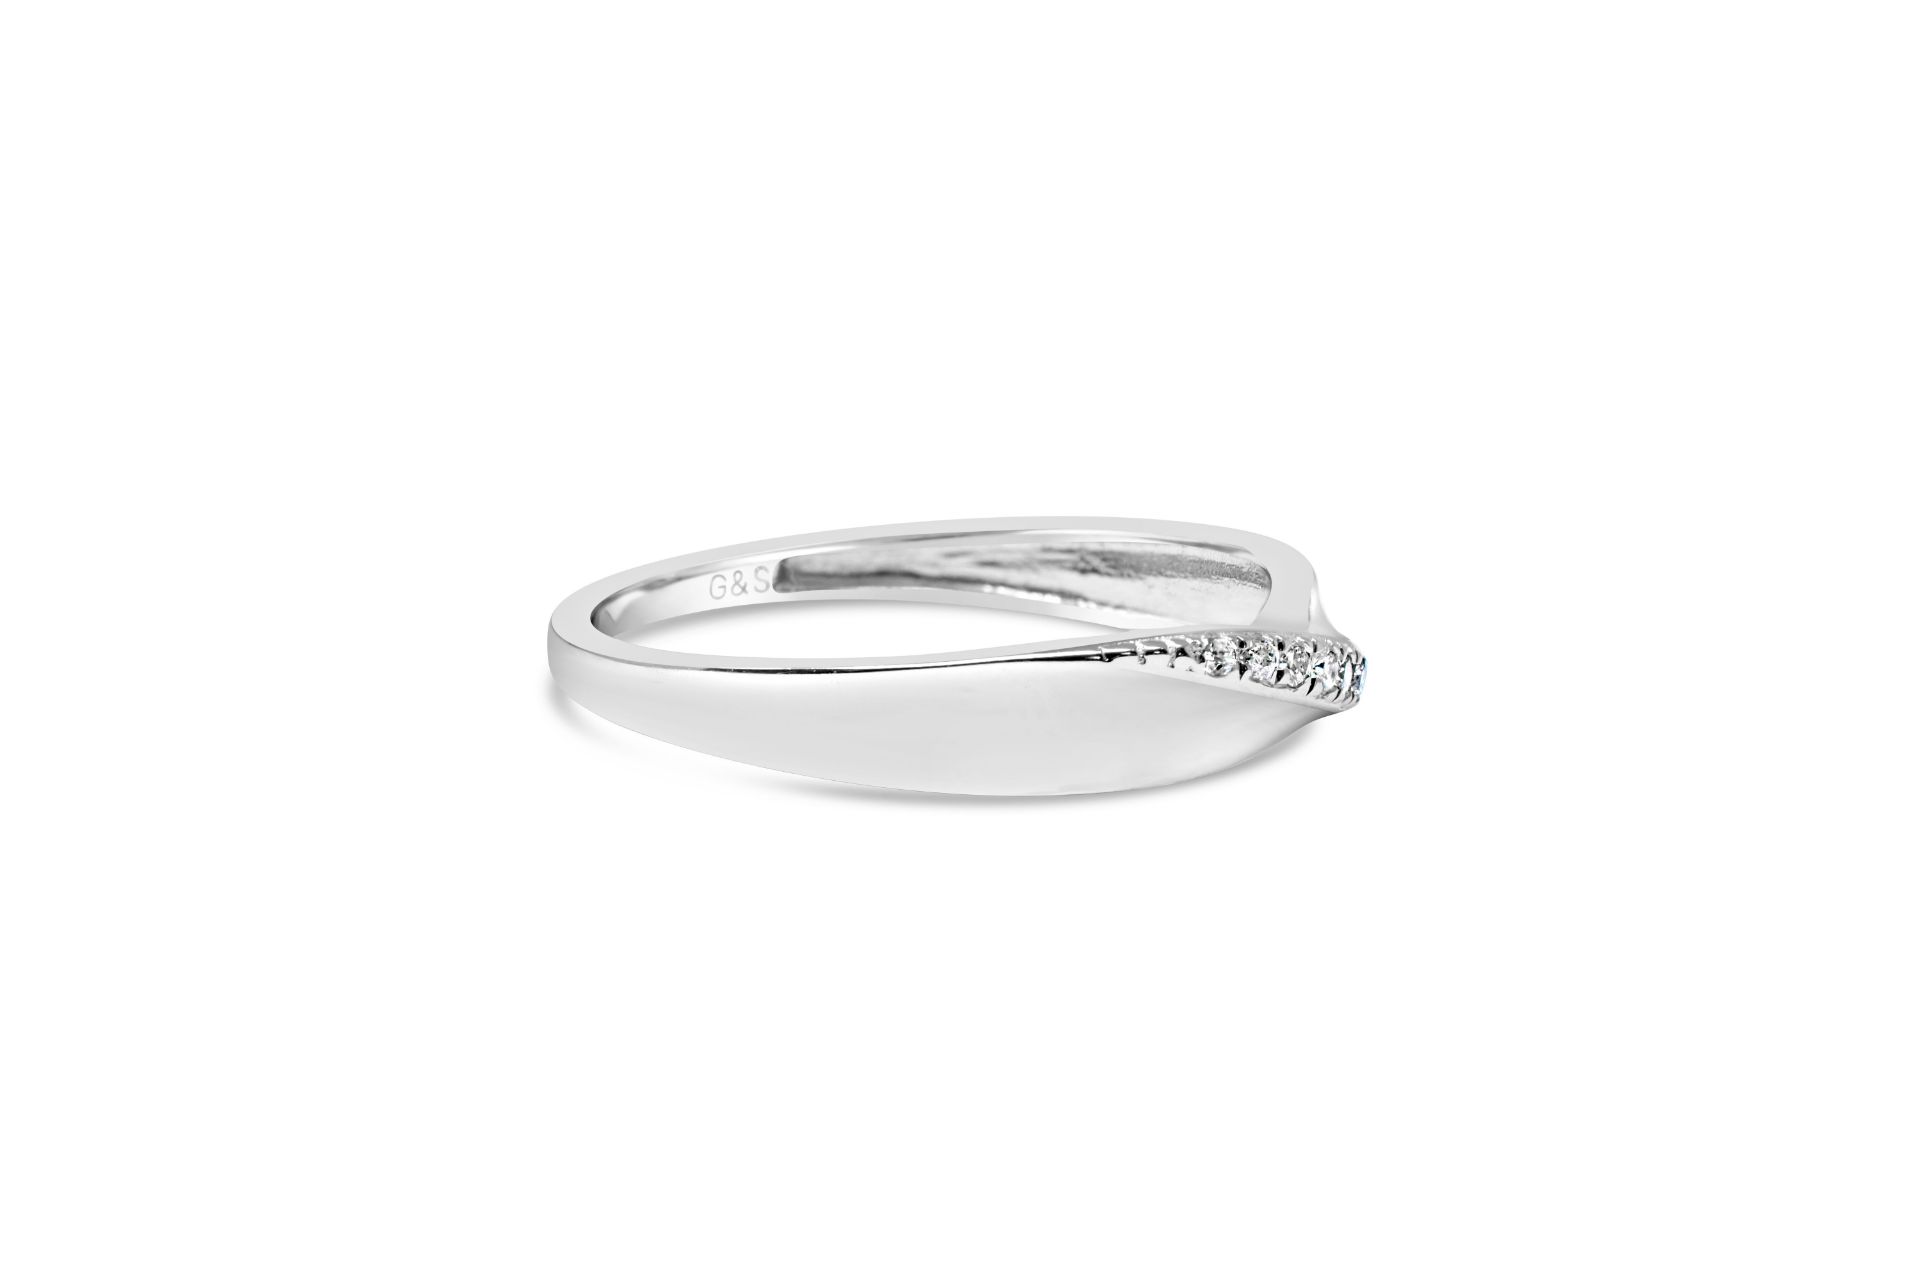 9CT White Gold Diamond Band with Twist, Size Q, Me - Image 3 of 4